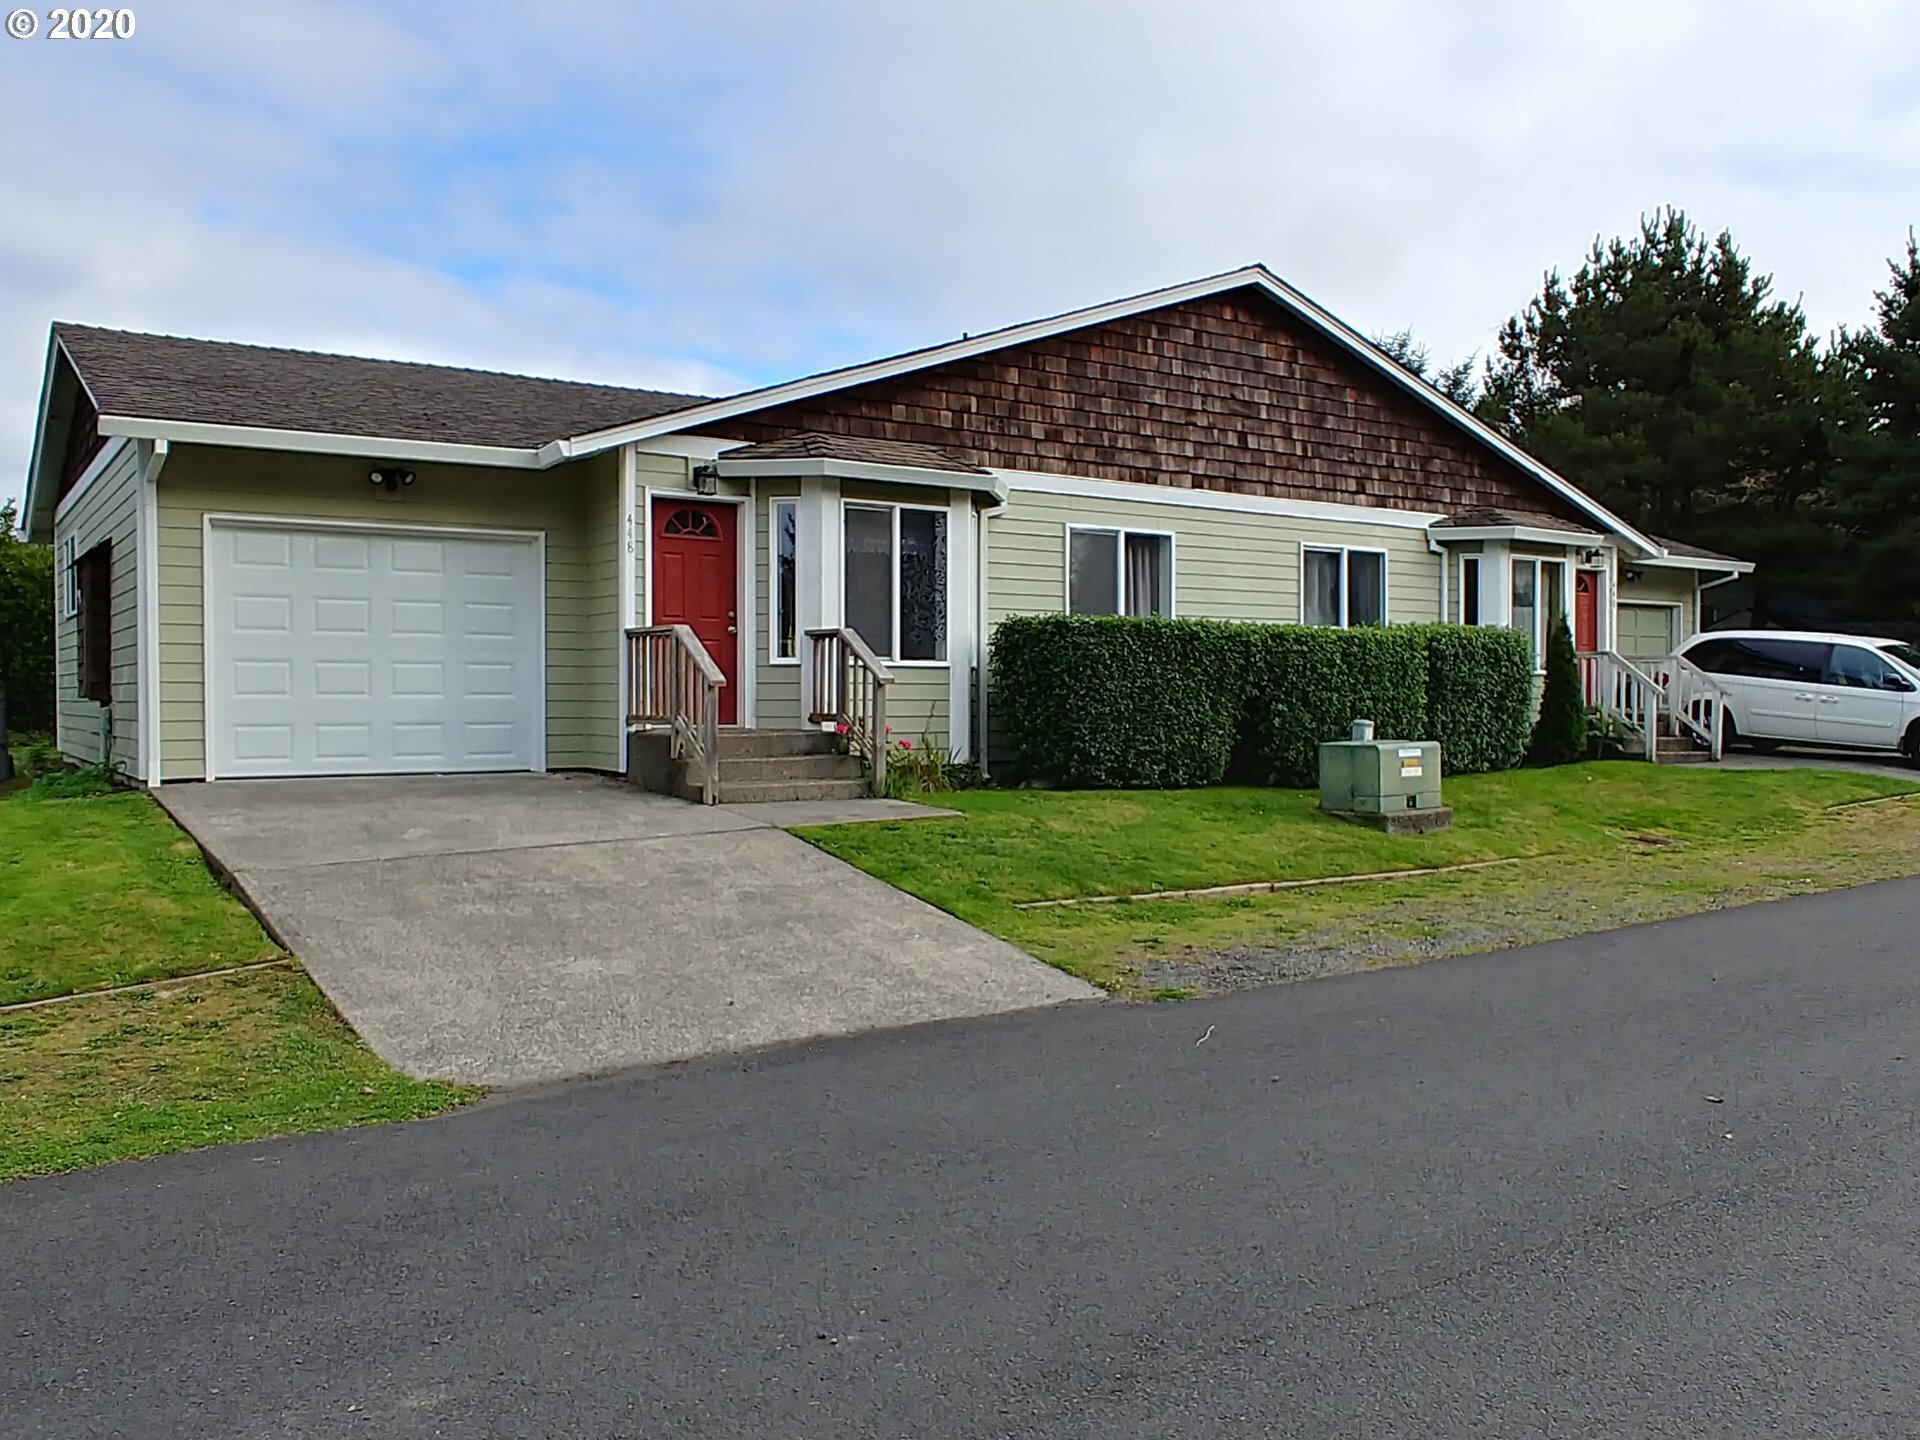 446/448 Elk Land Ct  Cannon Beach OR 97110 photo